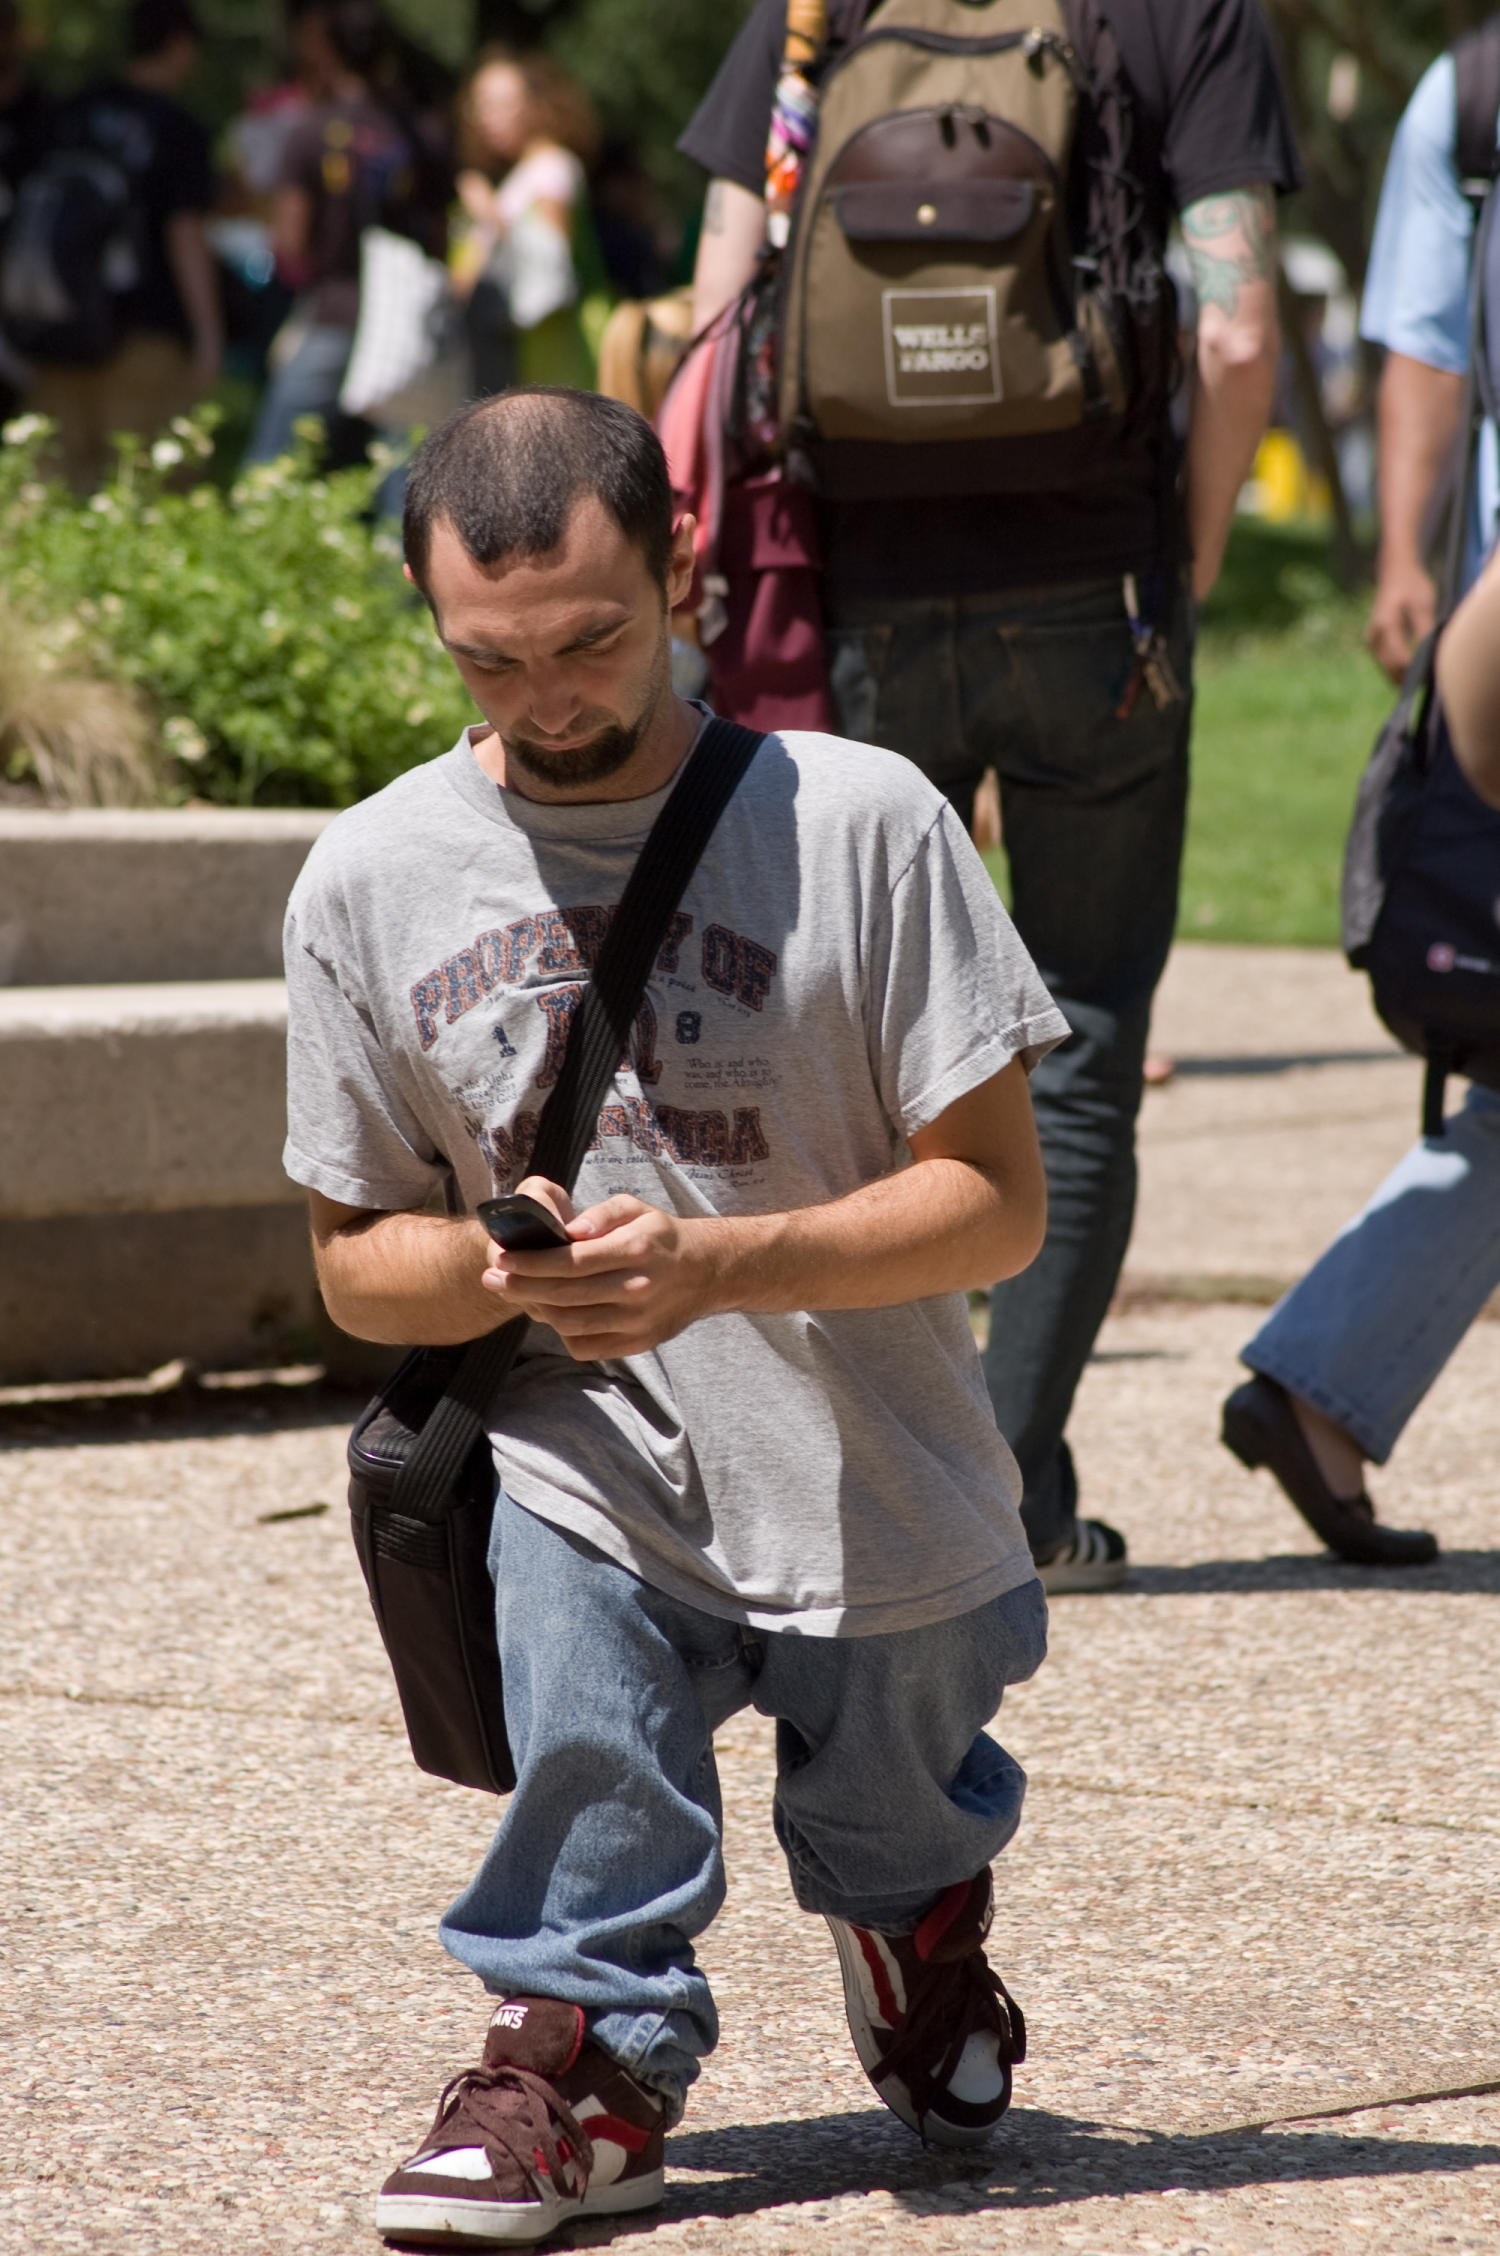 [UNT student walking and texting on campus] UNT Digital Library